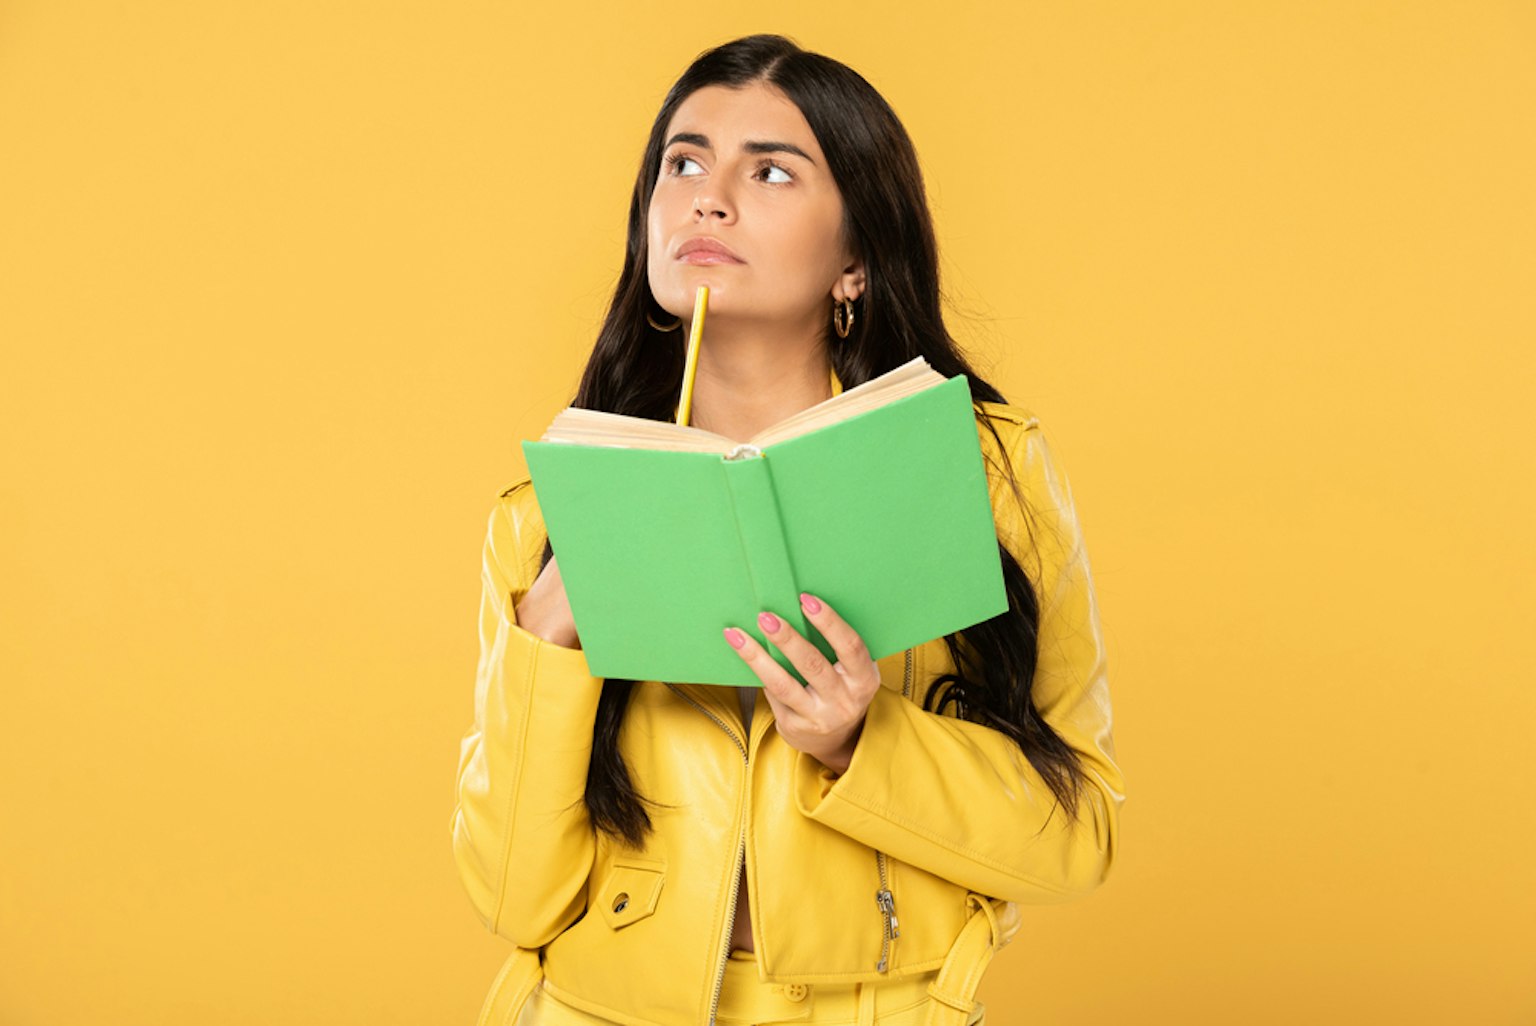 Female holding book while holding pencil against chin